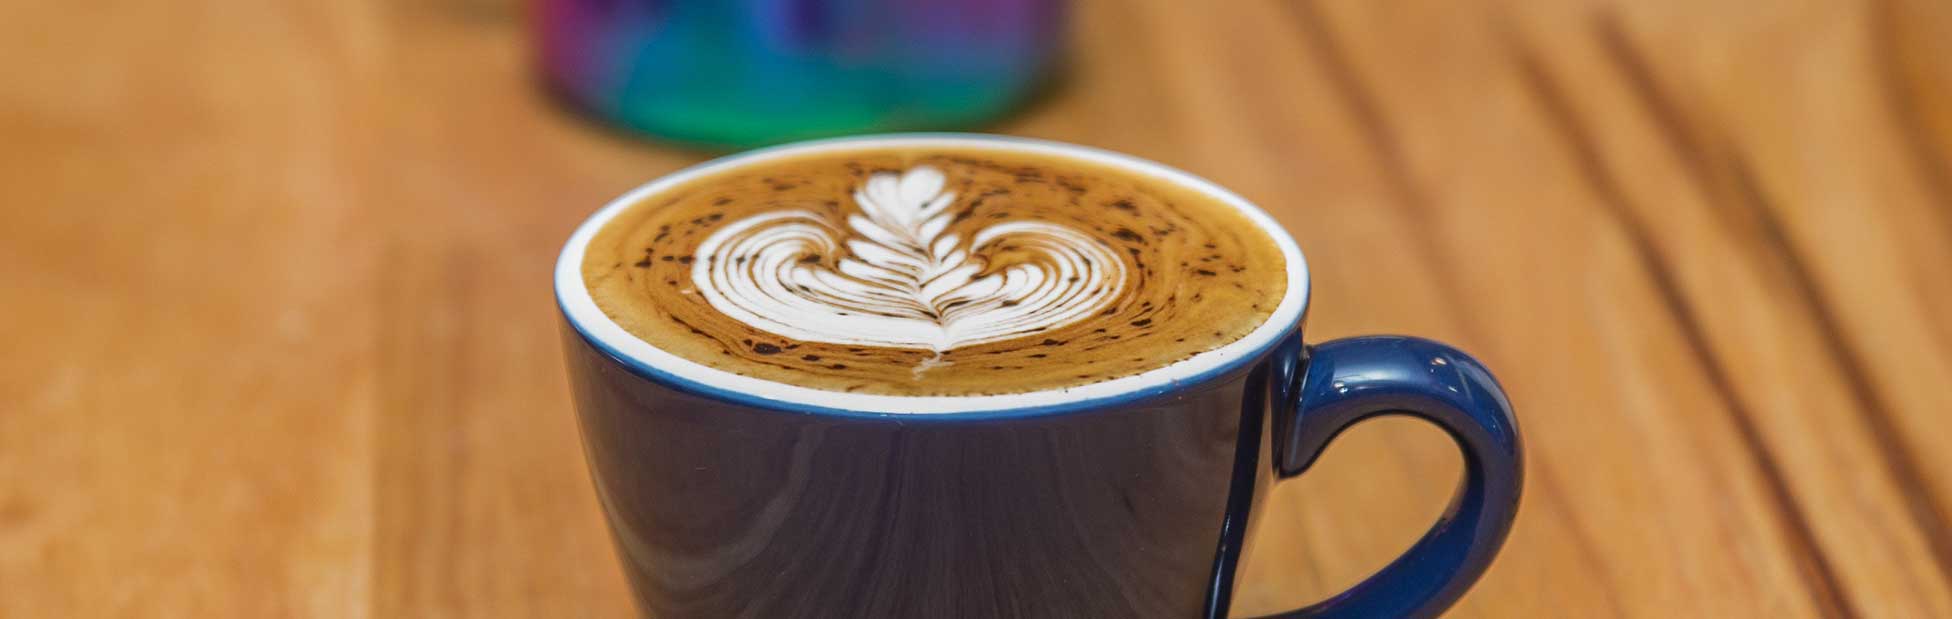 Coffee with spectacular barista art in blue cup